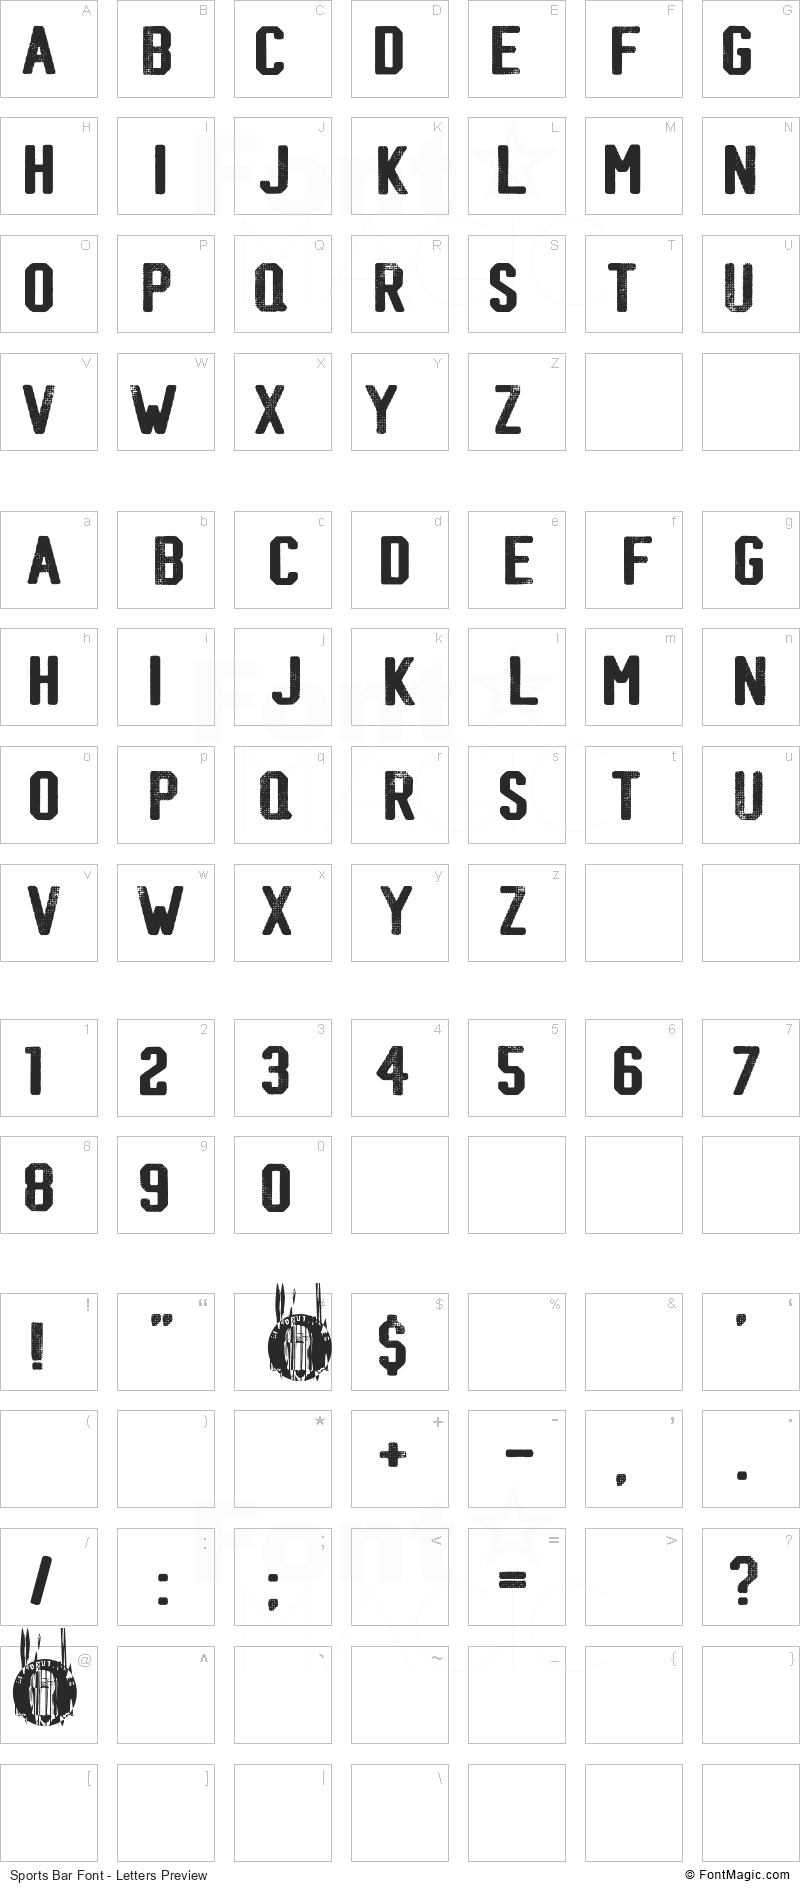 Sports Bar Font - All Latters Preview Chart